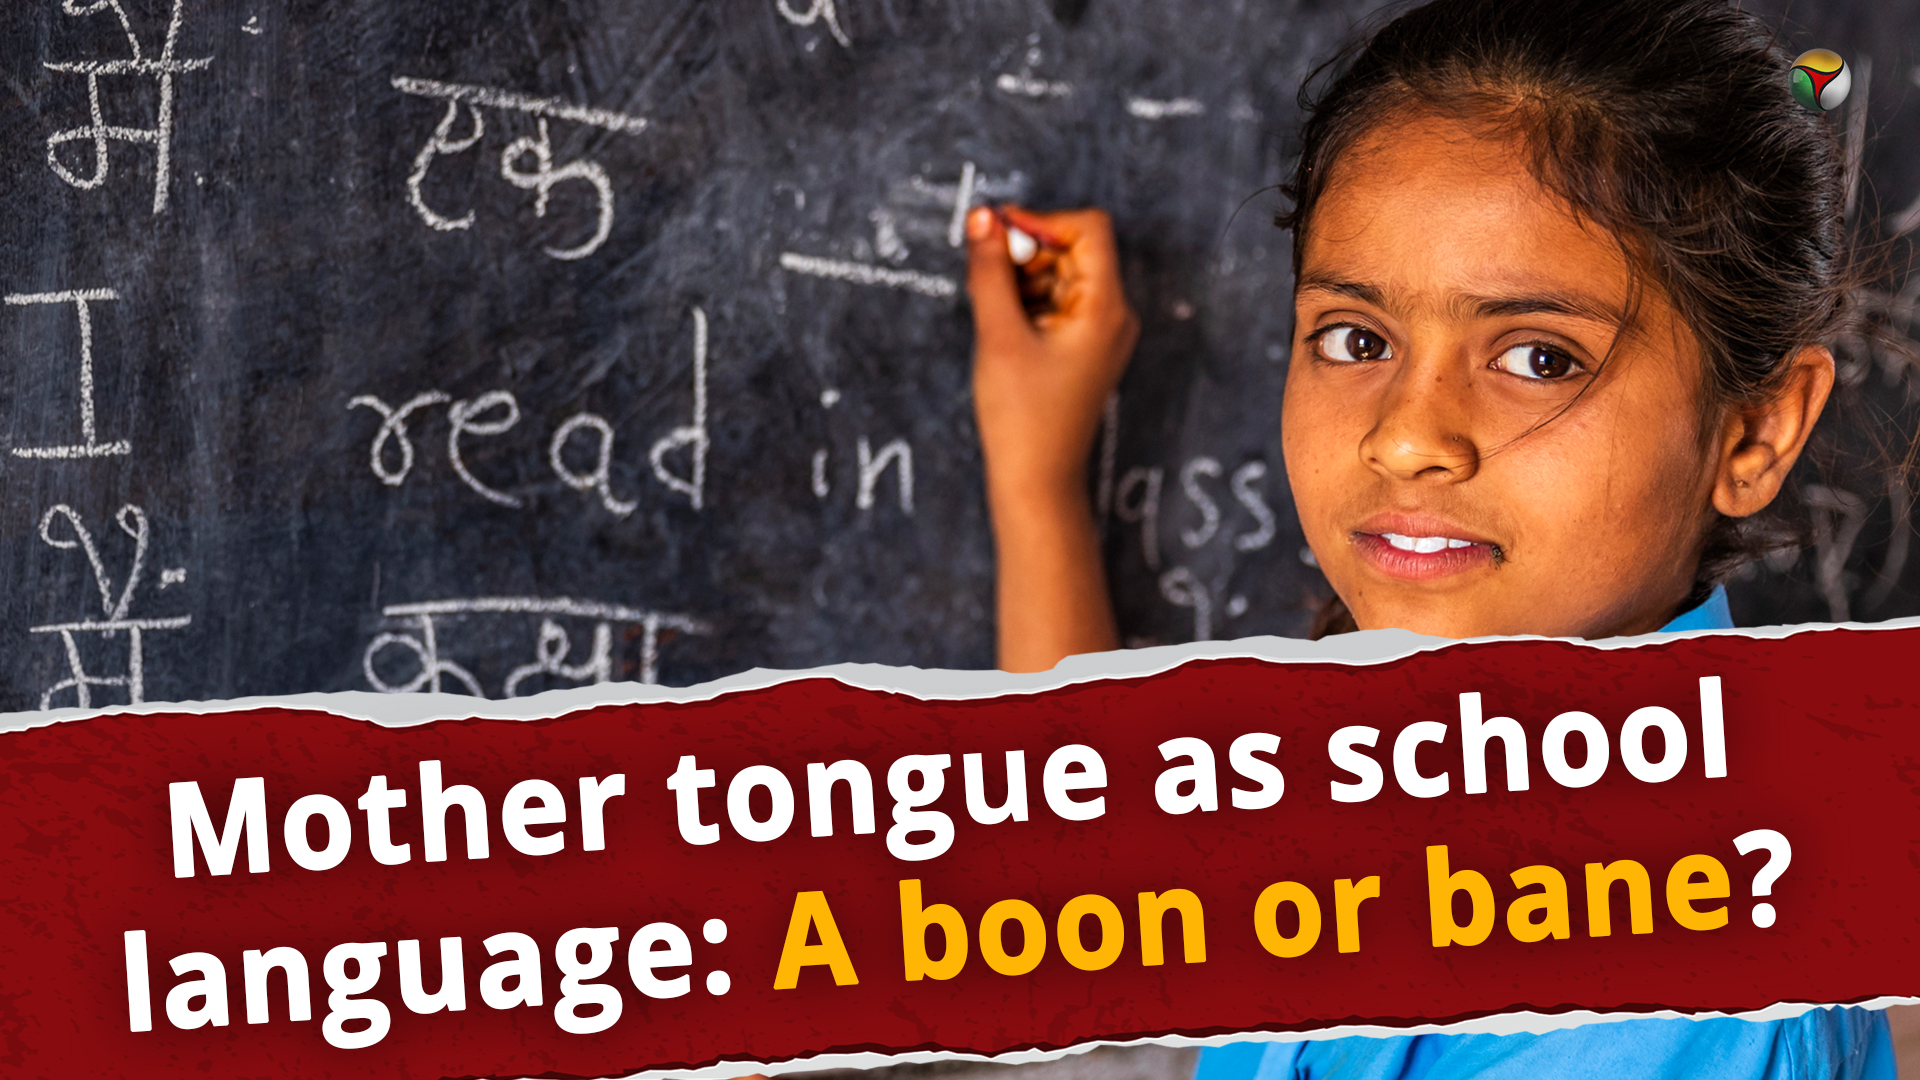 Mother tongue as school language: A boon or bane?